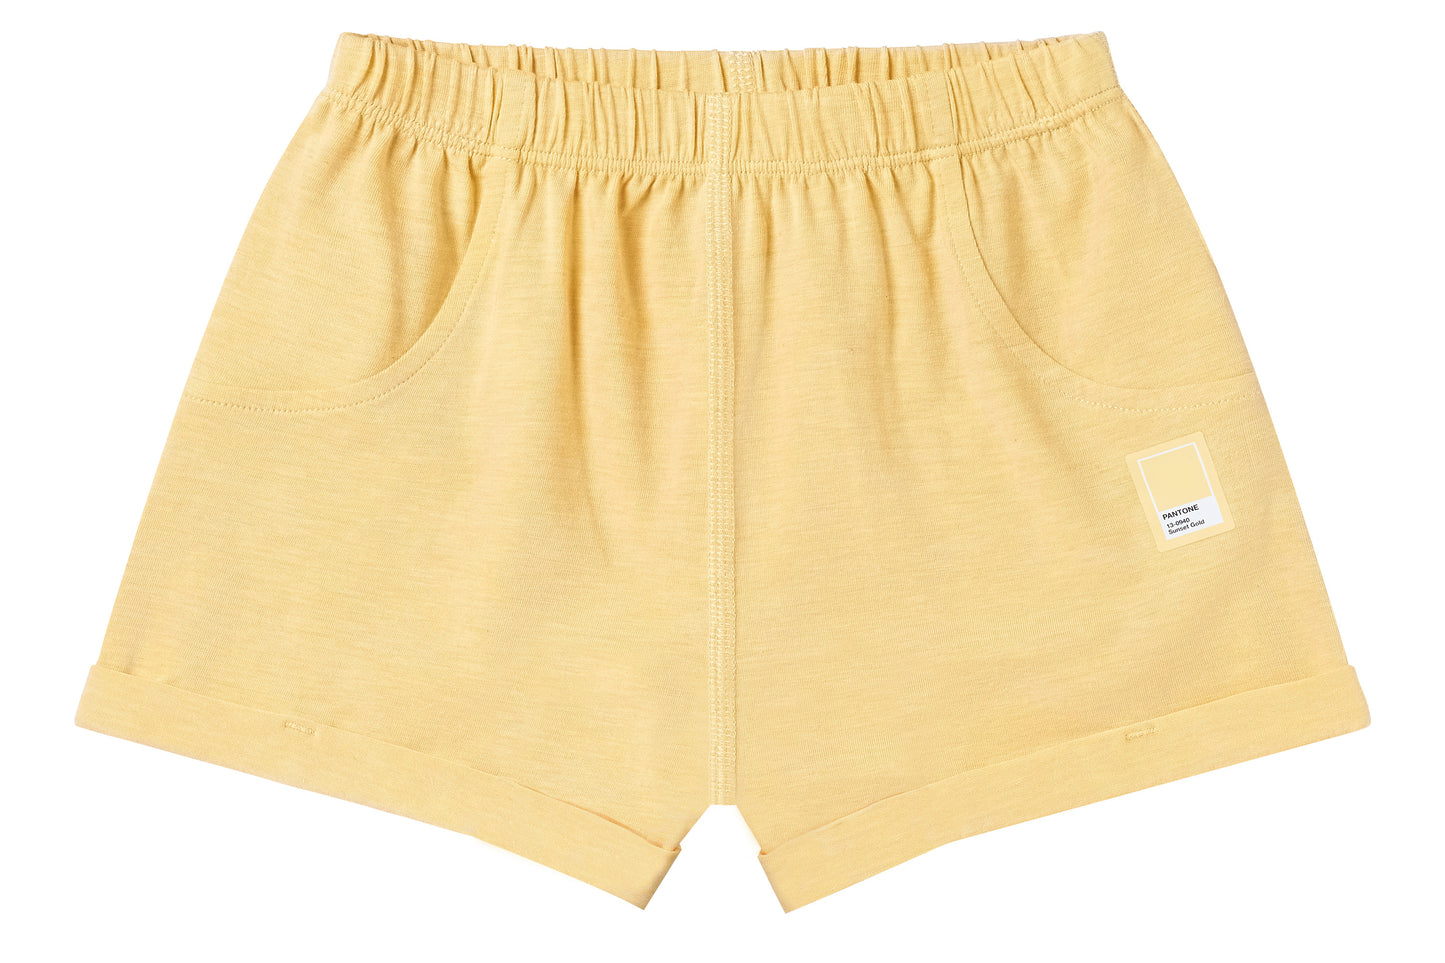 Load image into Gallery viewer, Shorts (Bamboo Jersey) - Pantone Sunset Gold
